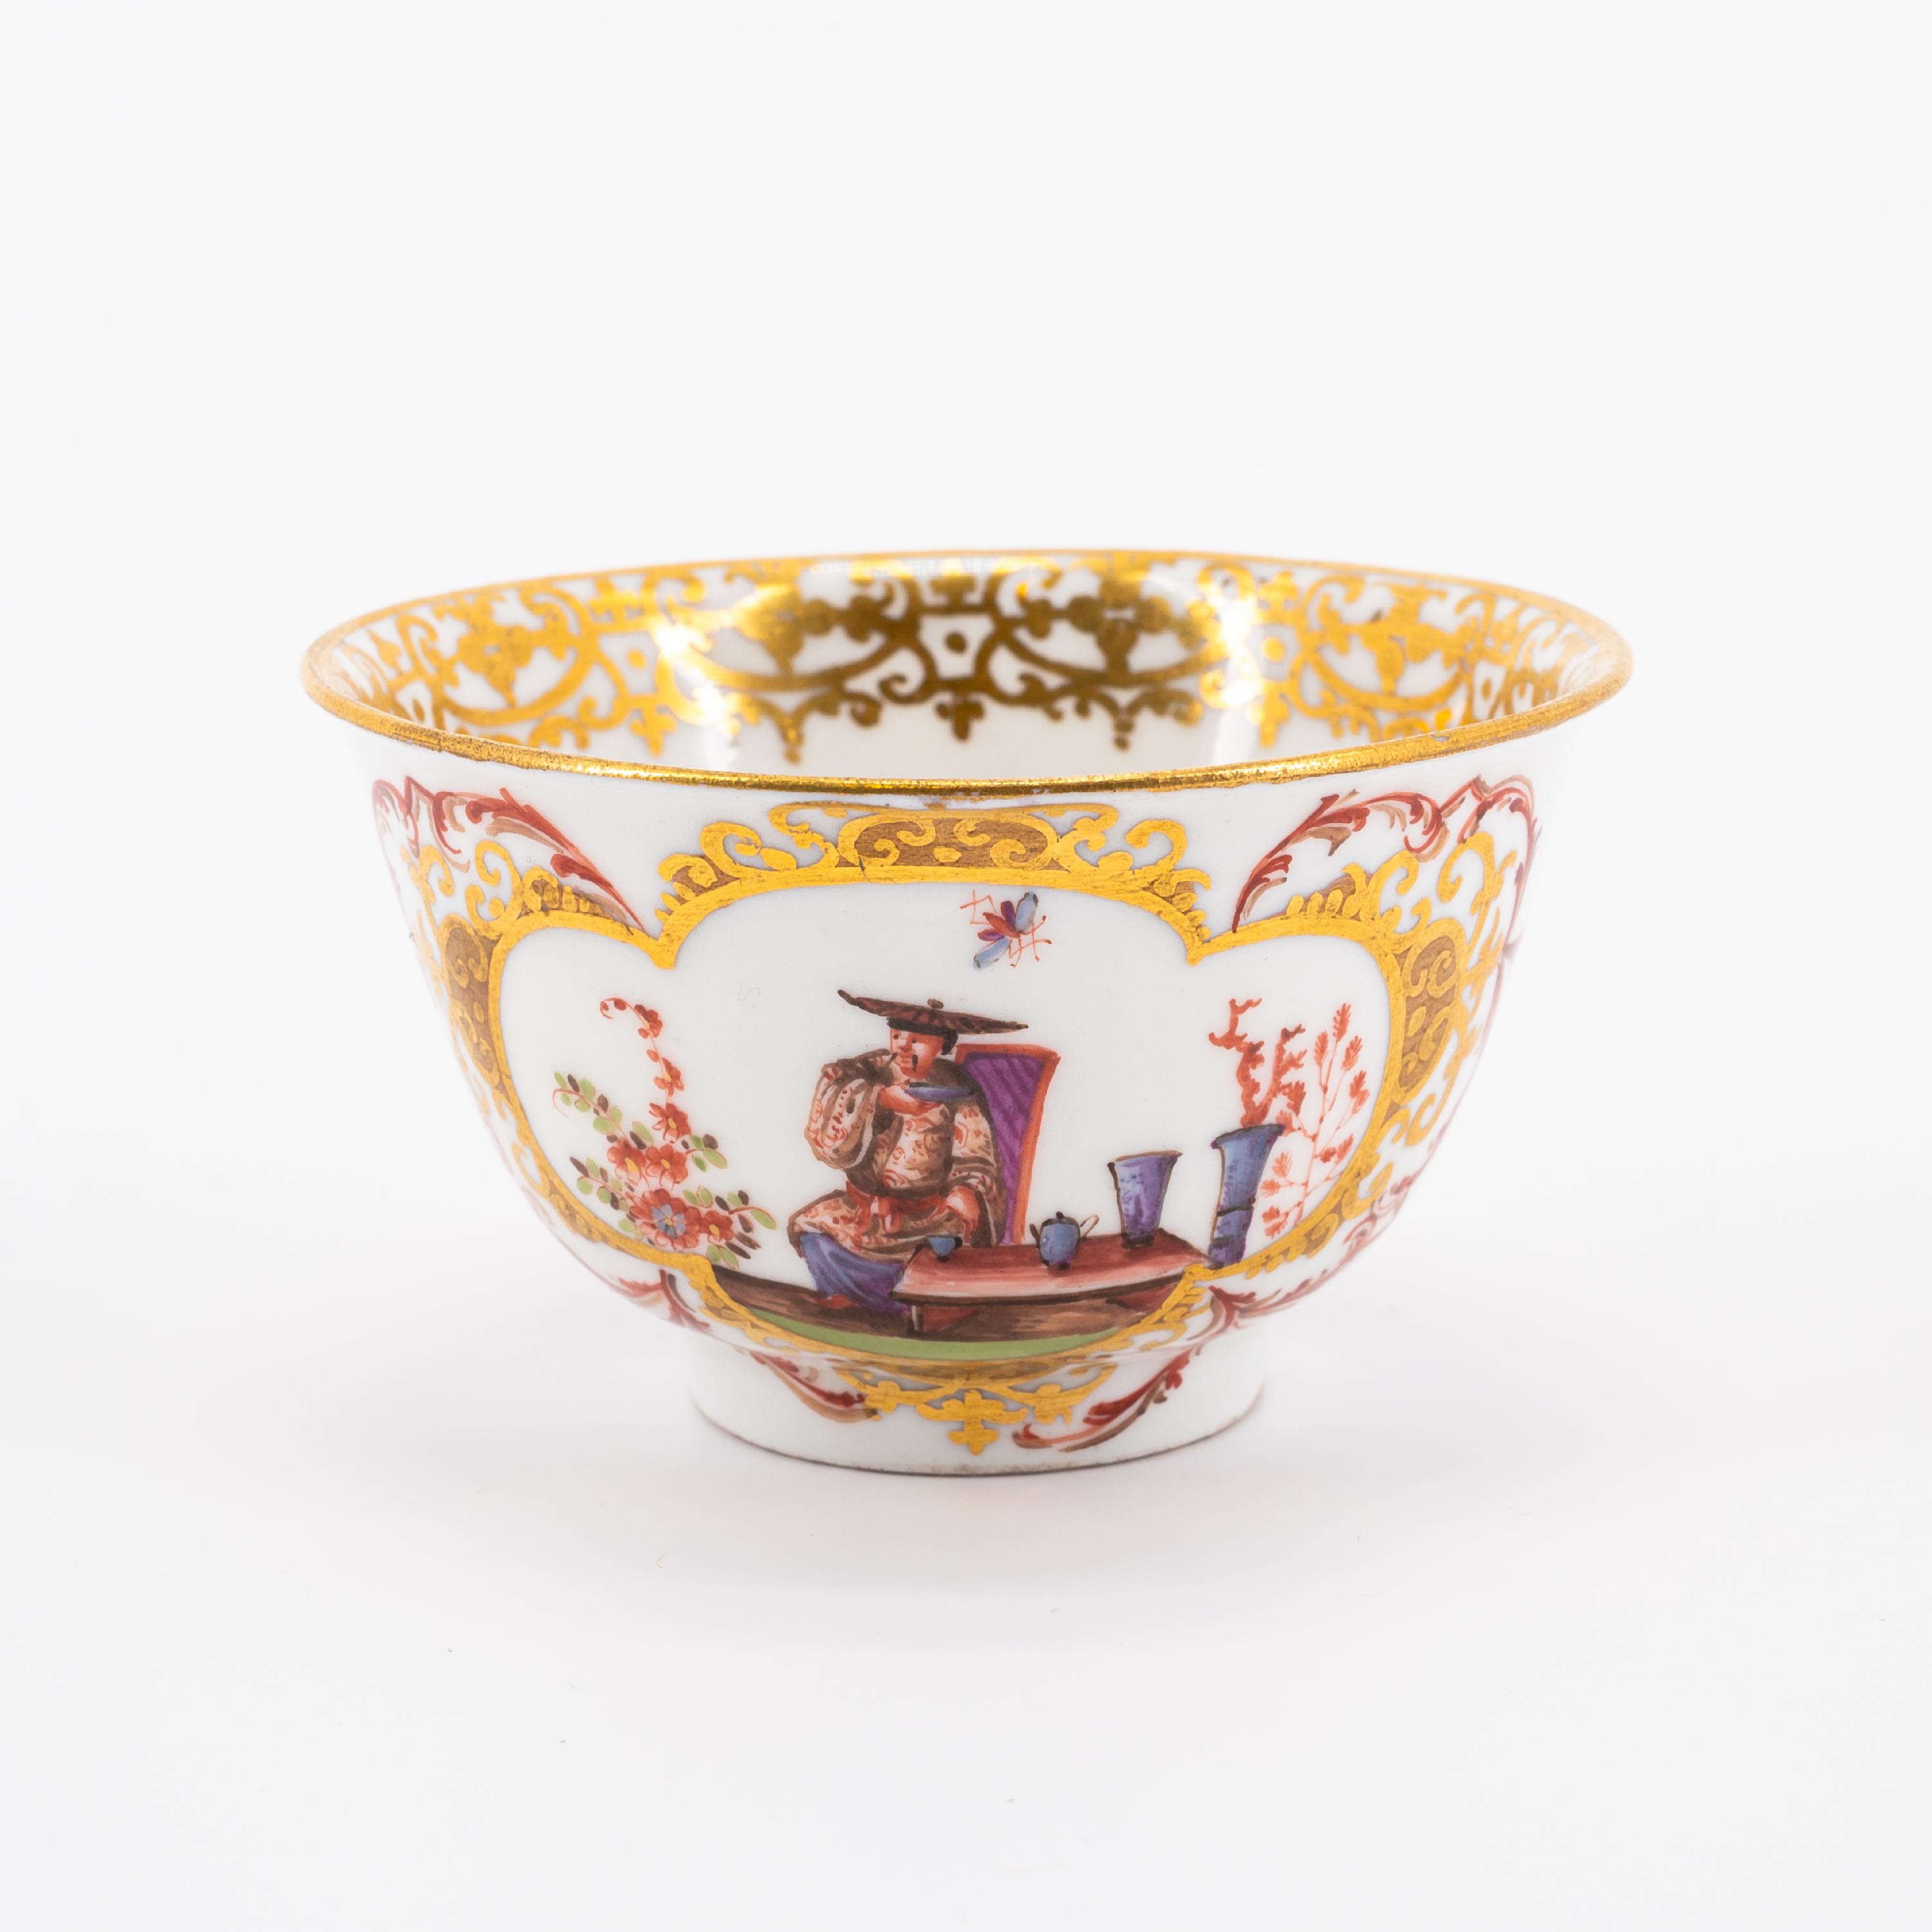 PORCELAIN TEA BOWL WITH CHINOISERIES - Image 3 of 6